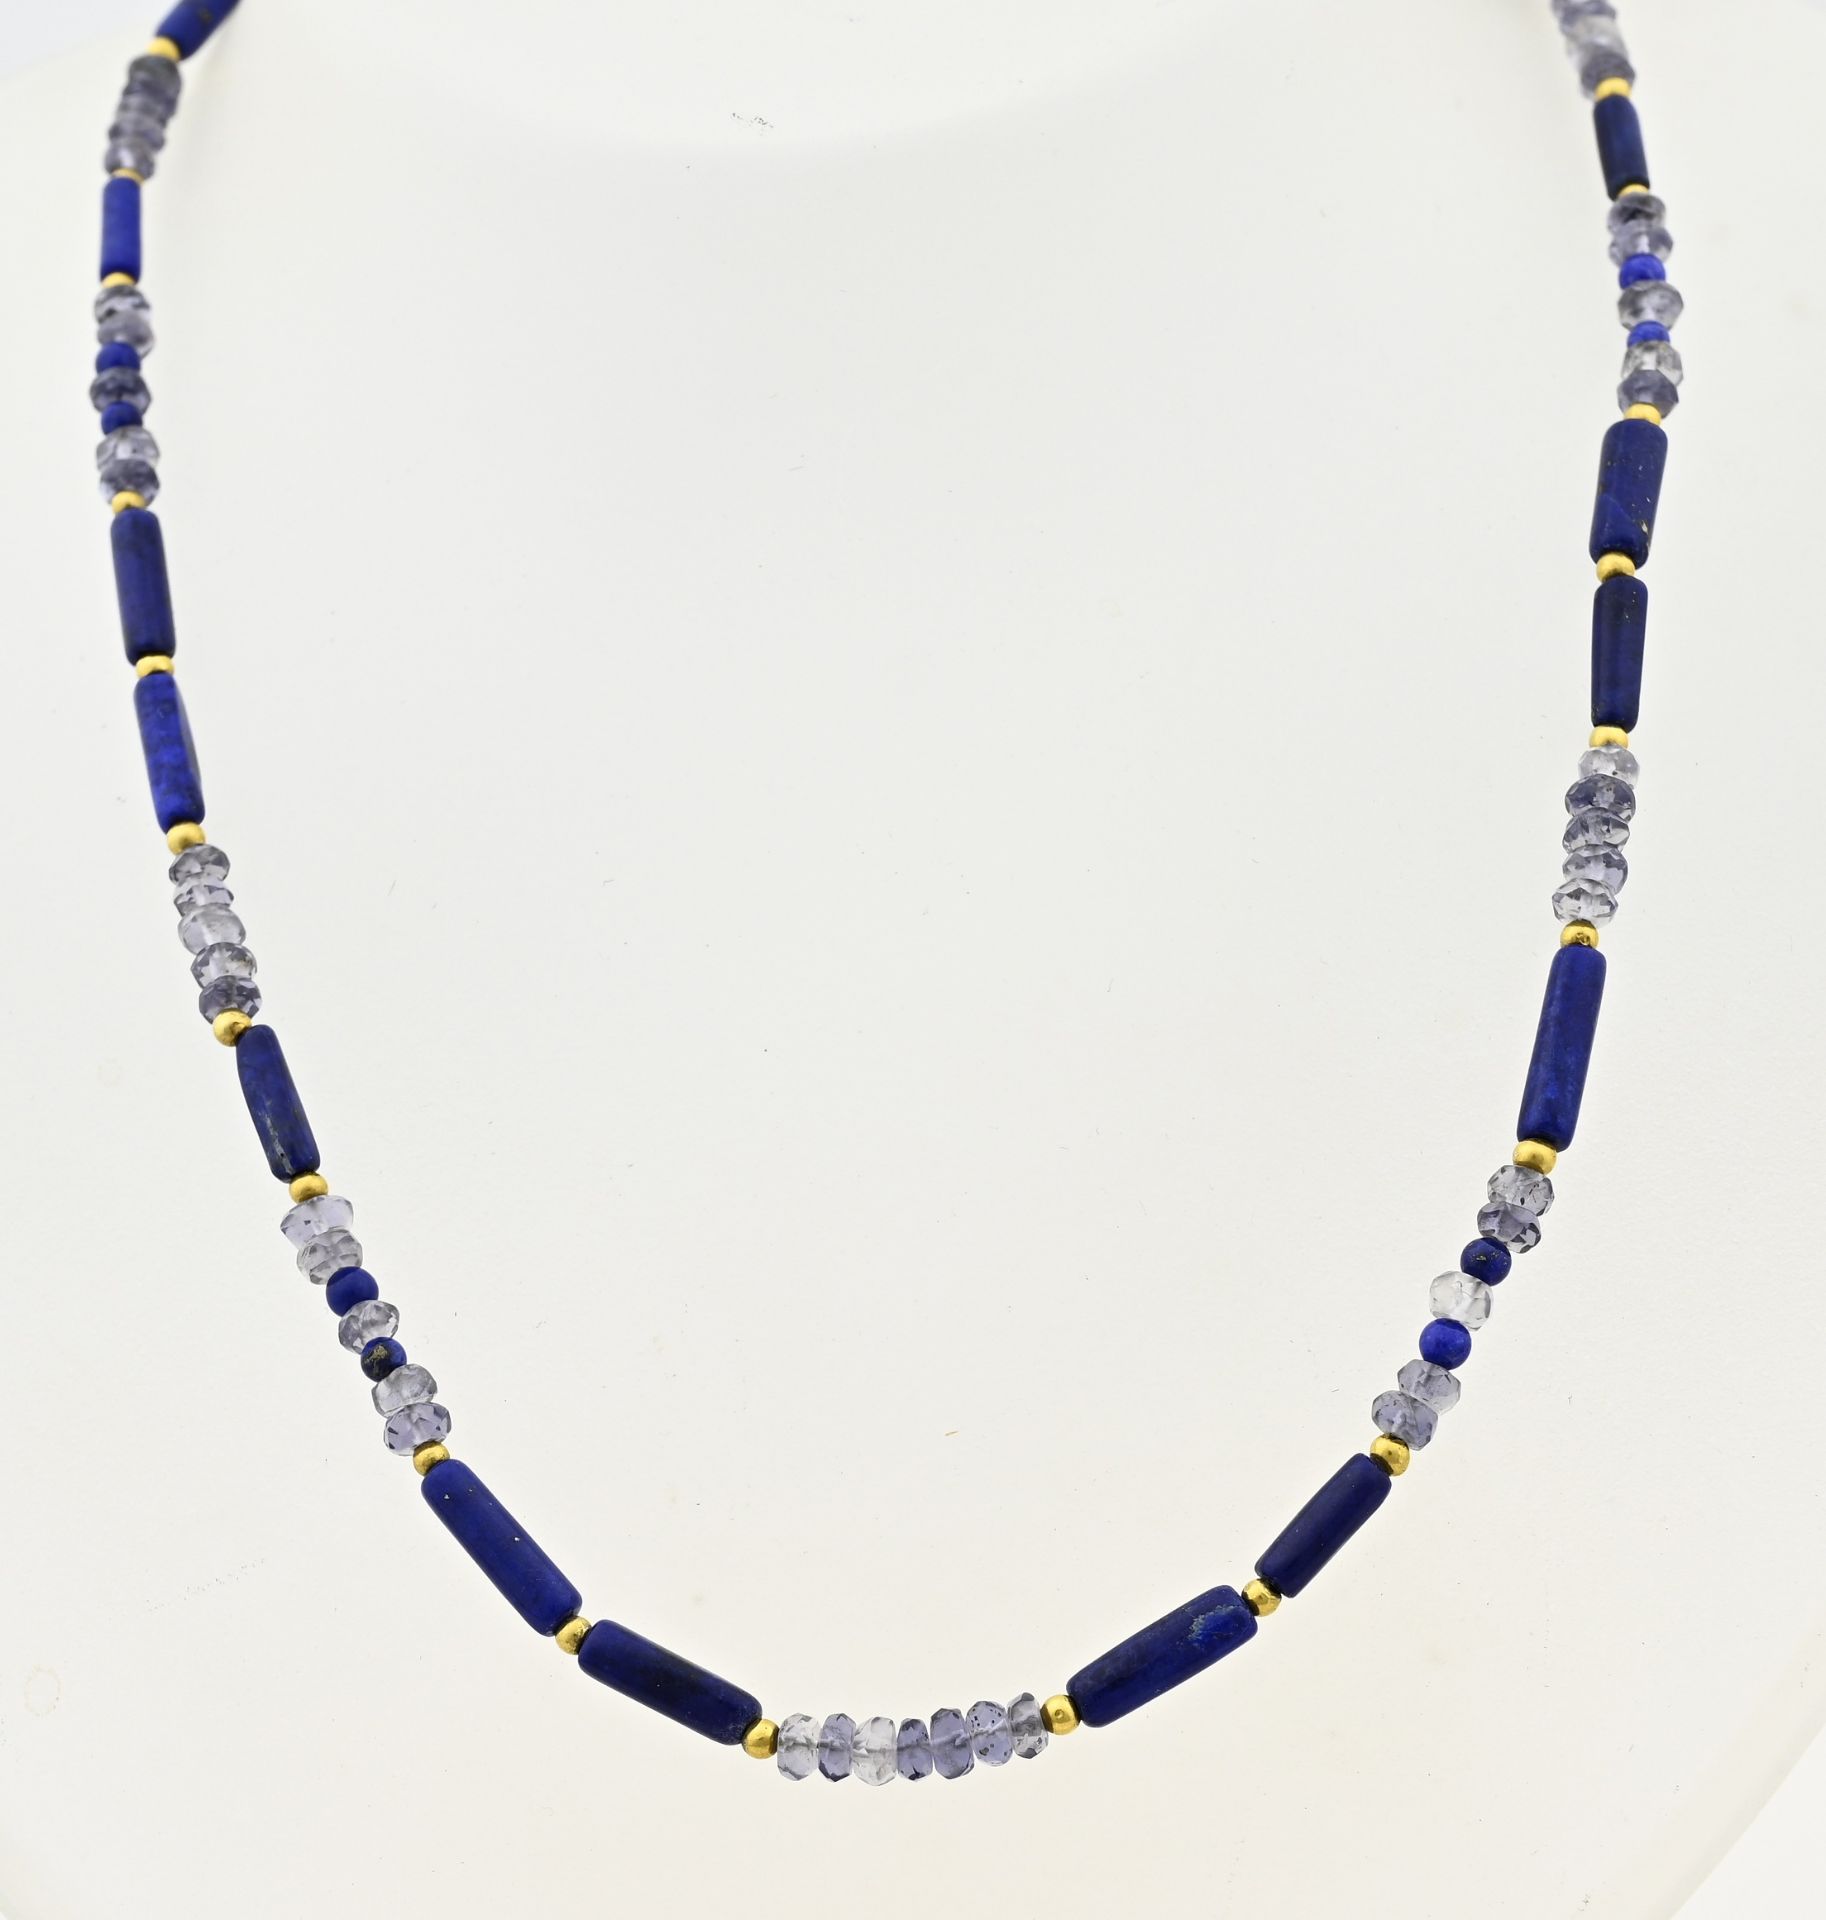 Necklace with lapis lazuli with gold